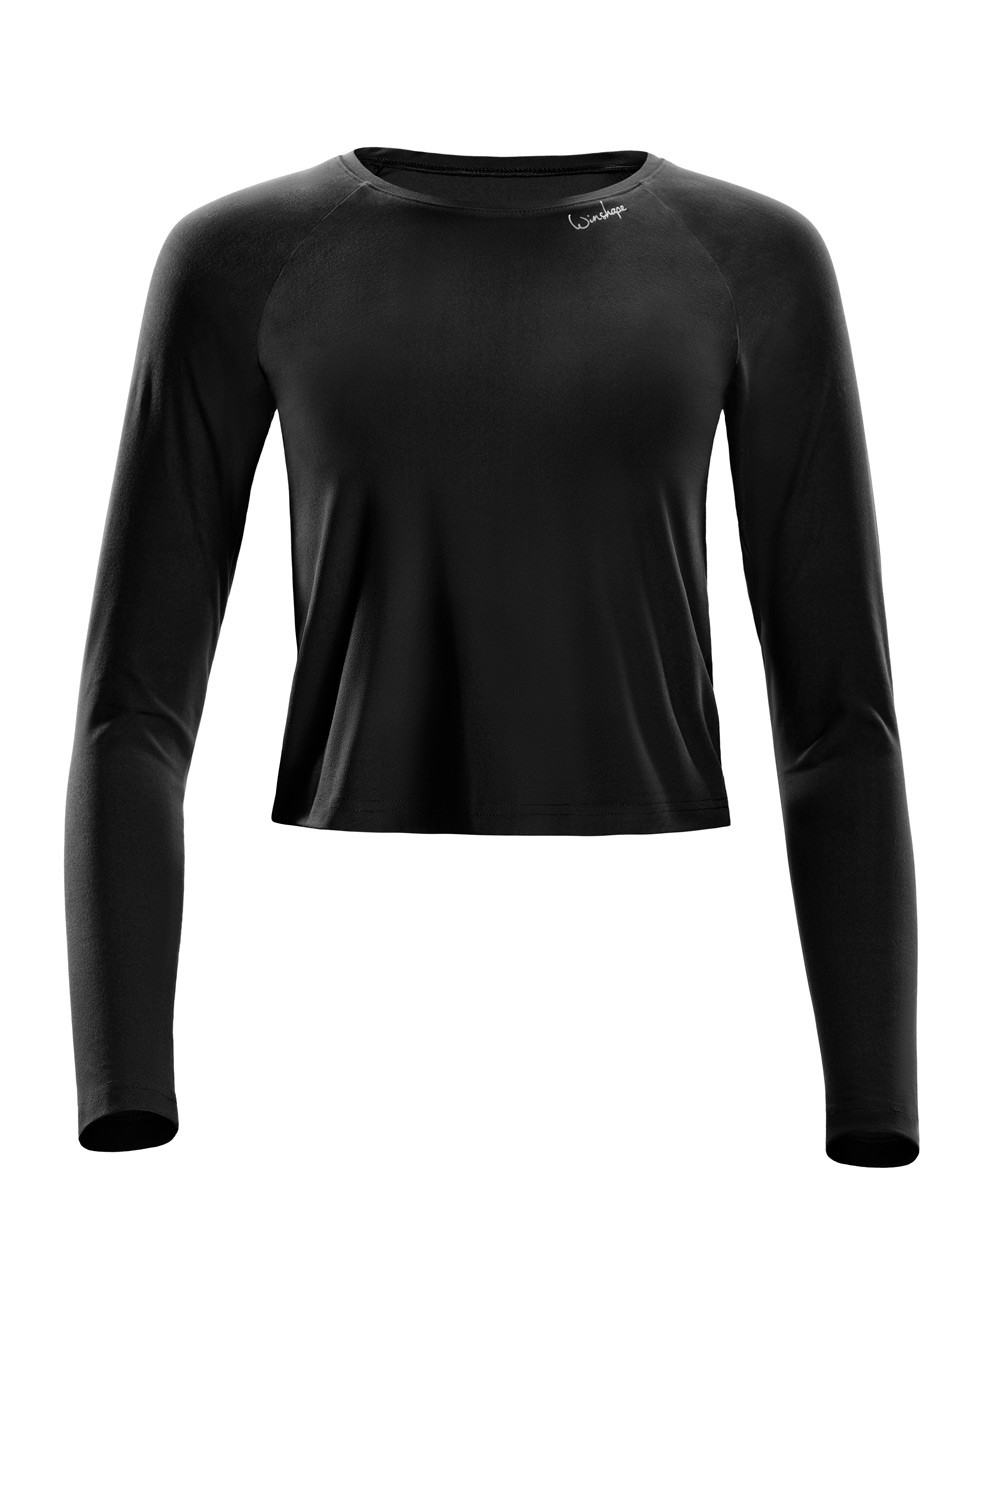 Functional Light and Soft Cropped Long Sleeve Top AET119LS, schwarz,  Winshape Ultra Soft Style